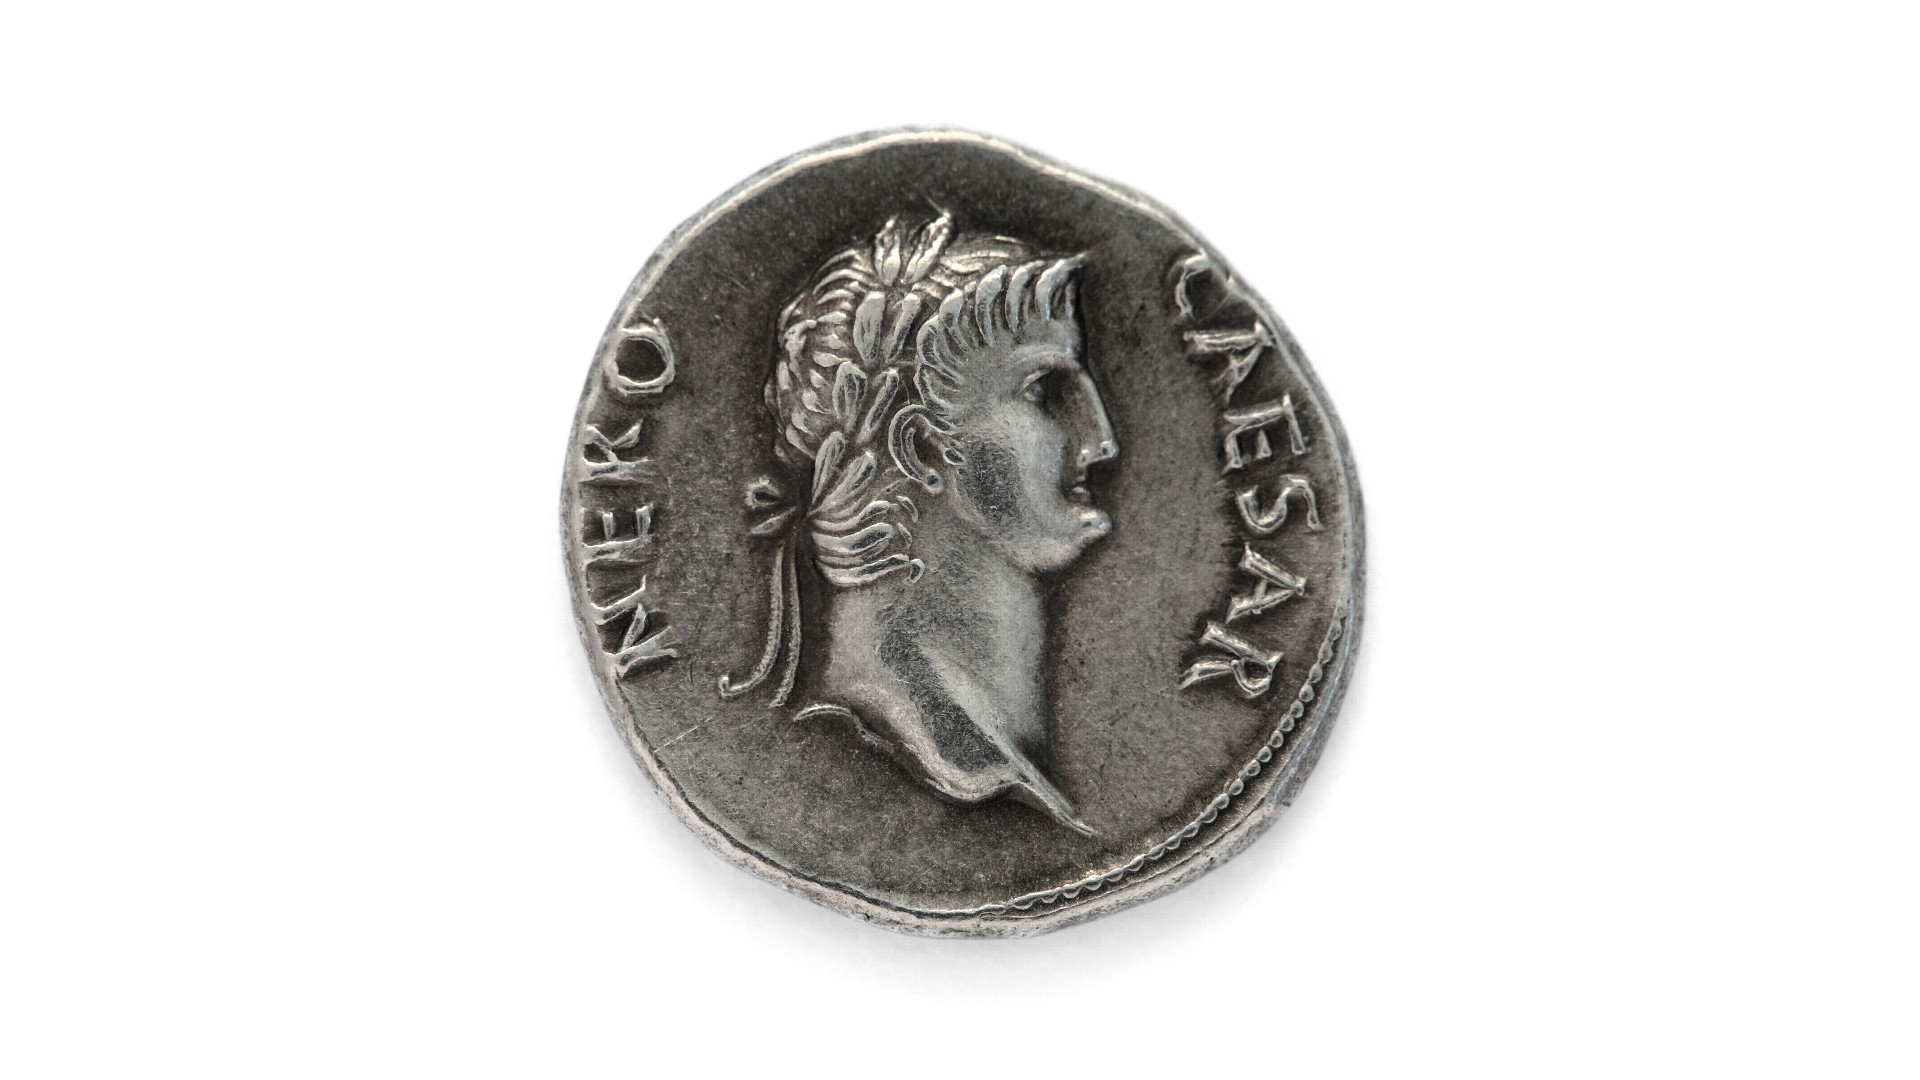 A Roman coin which has the profile of Nero on it. On the left the text reads 'Nero' and on the right it reads ' Caesar.'